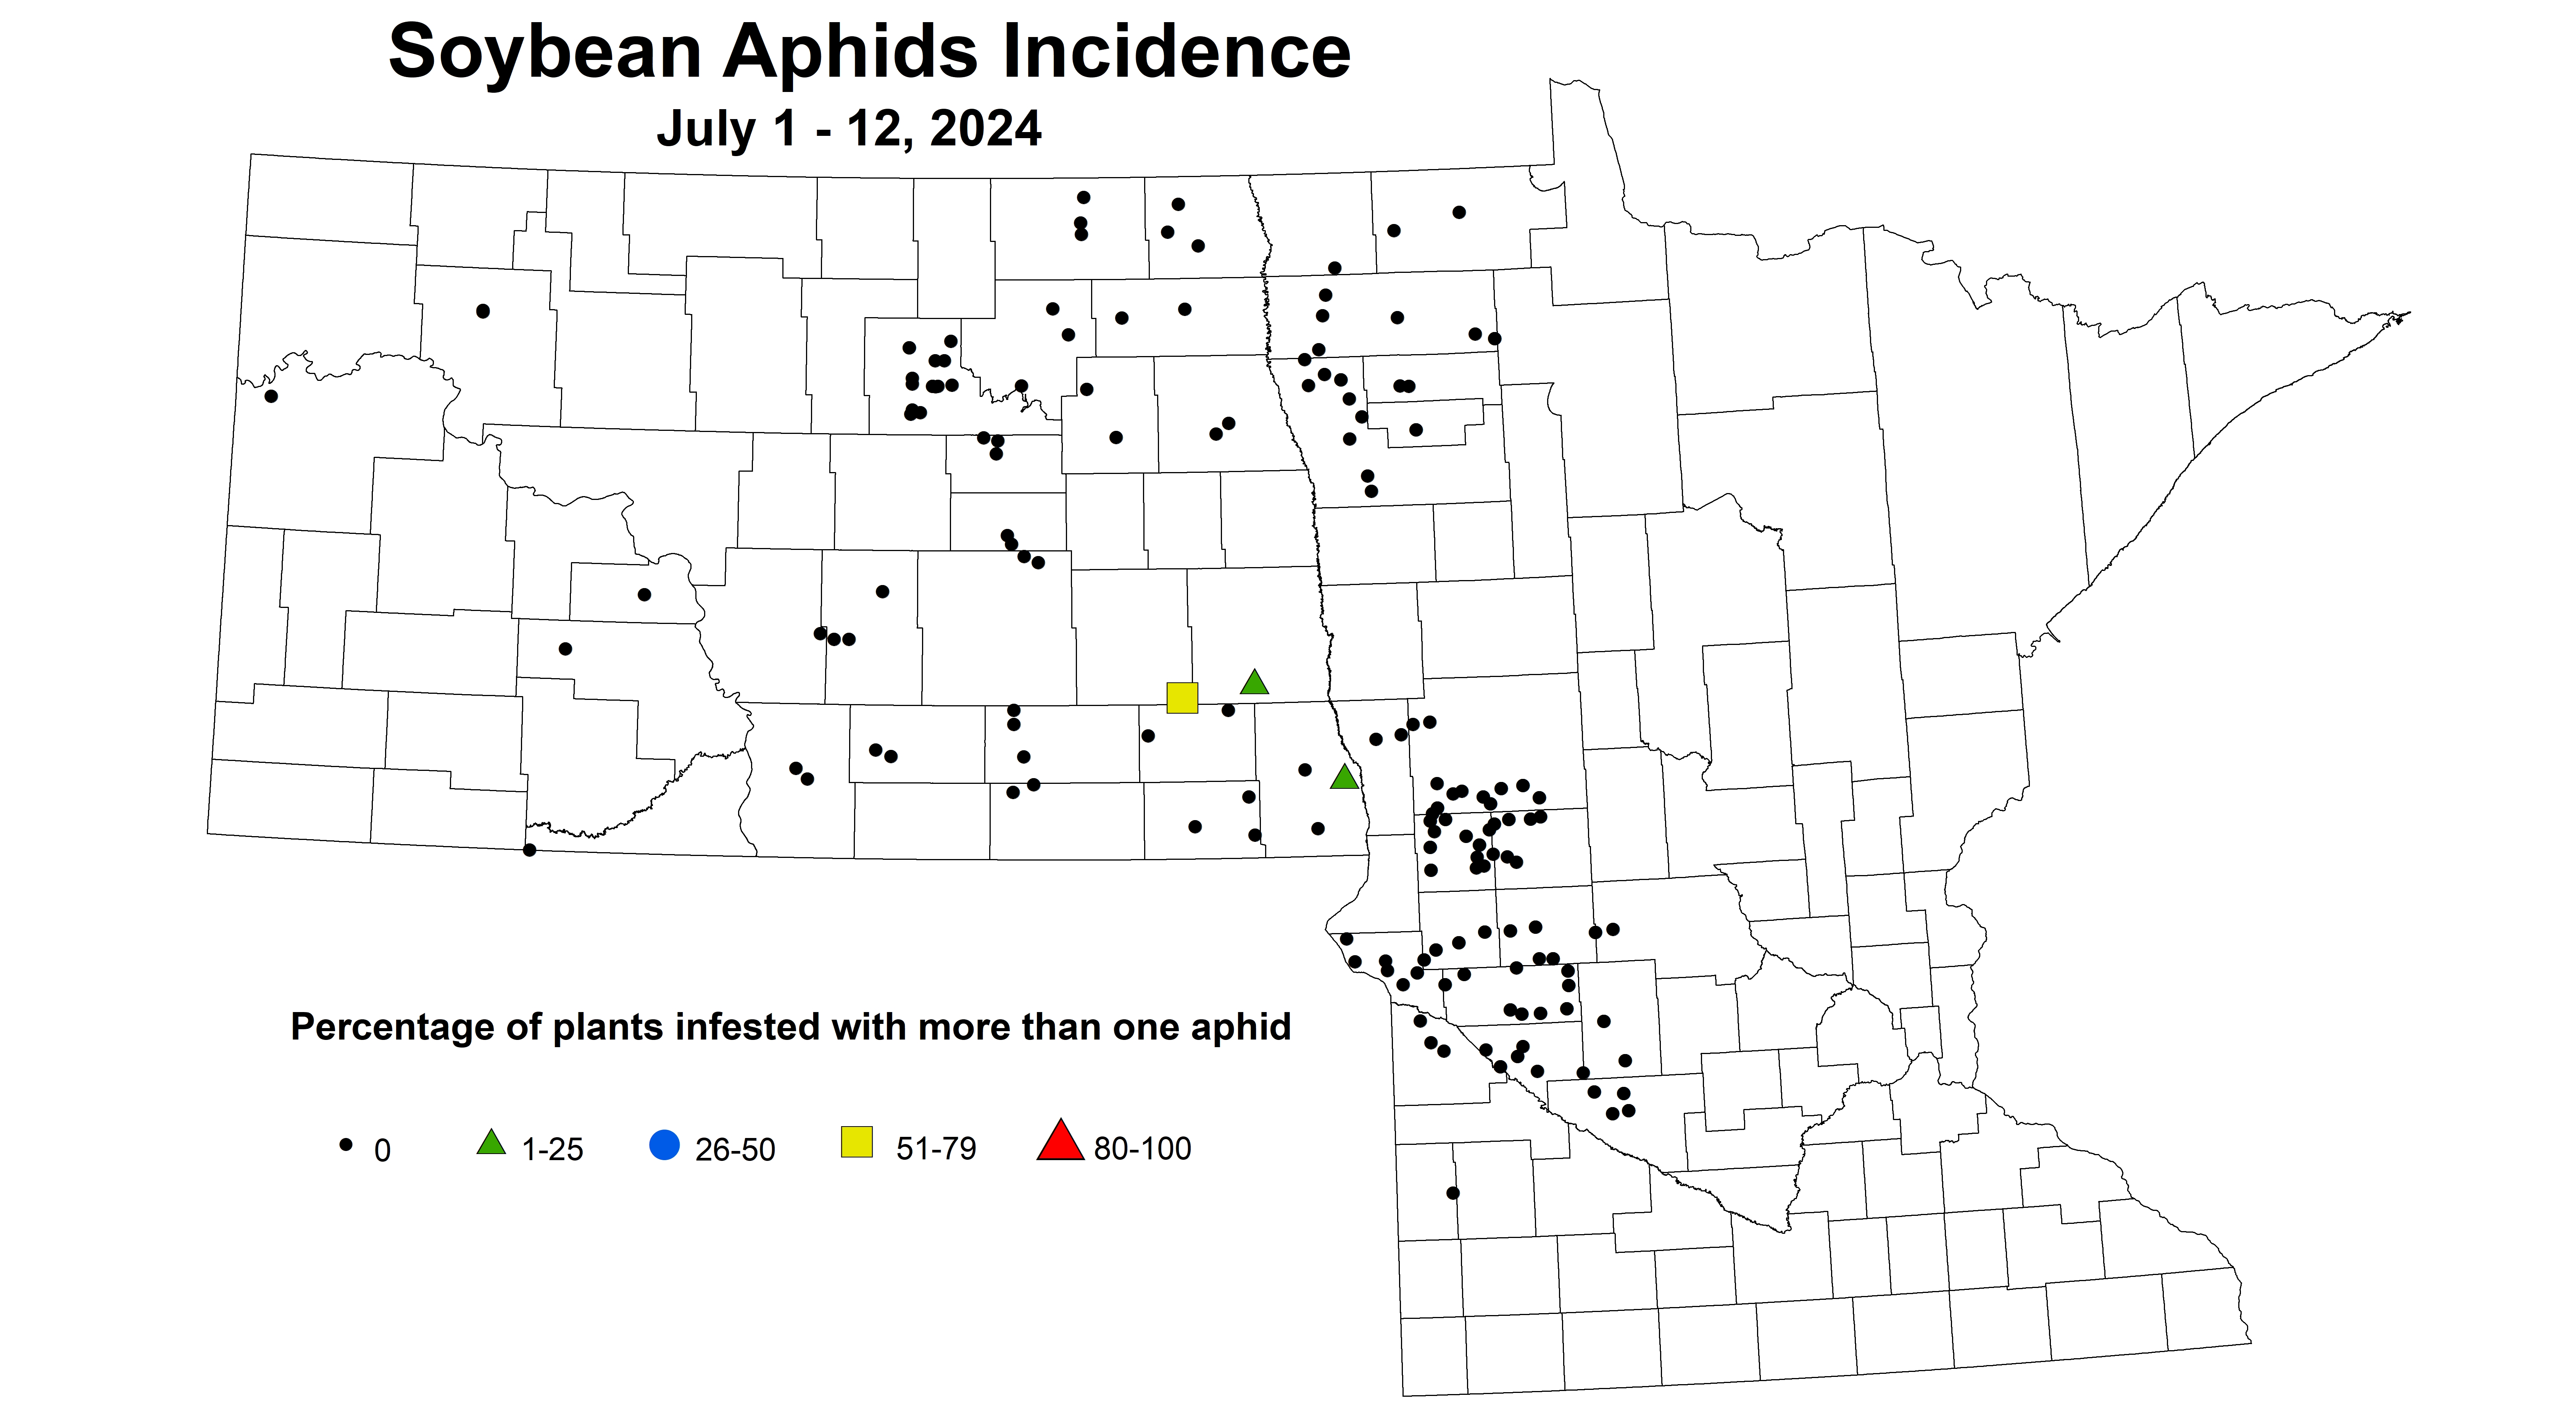 soybean aphid incidence July 1-12 2024